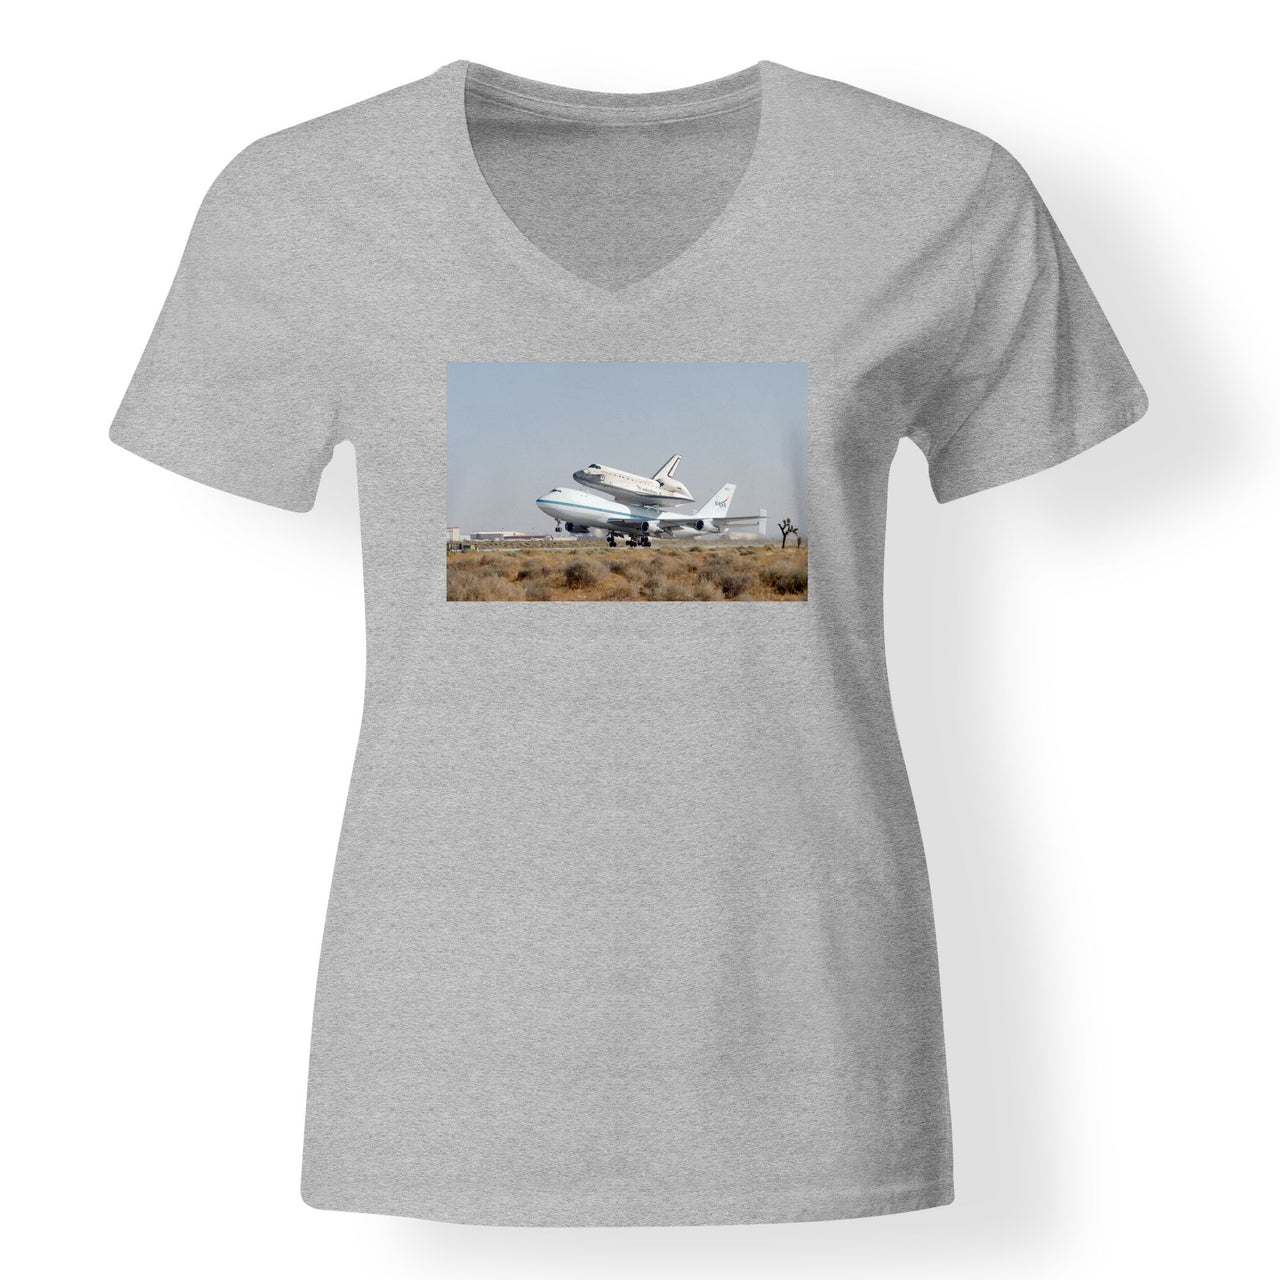 Boeing 747 Carrying Nasa's Space Shuttle Designed V-Neck T-Shirts